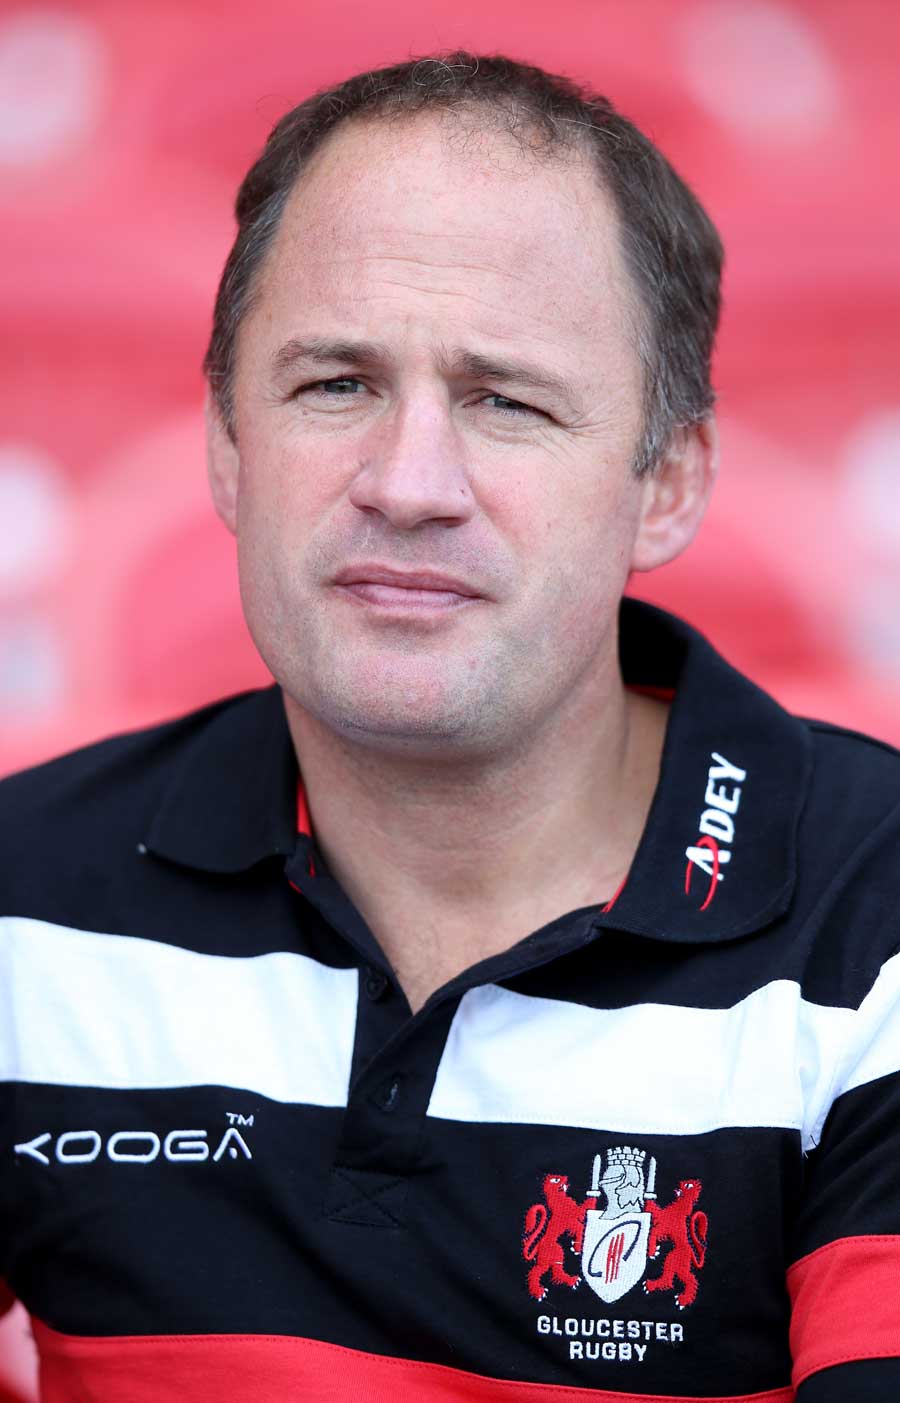 Gloucester's new director of rugby David Humphreys